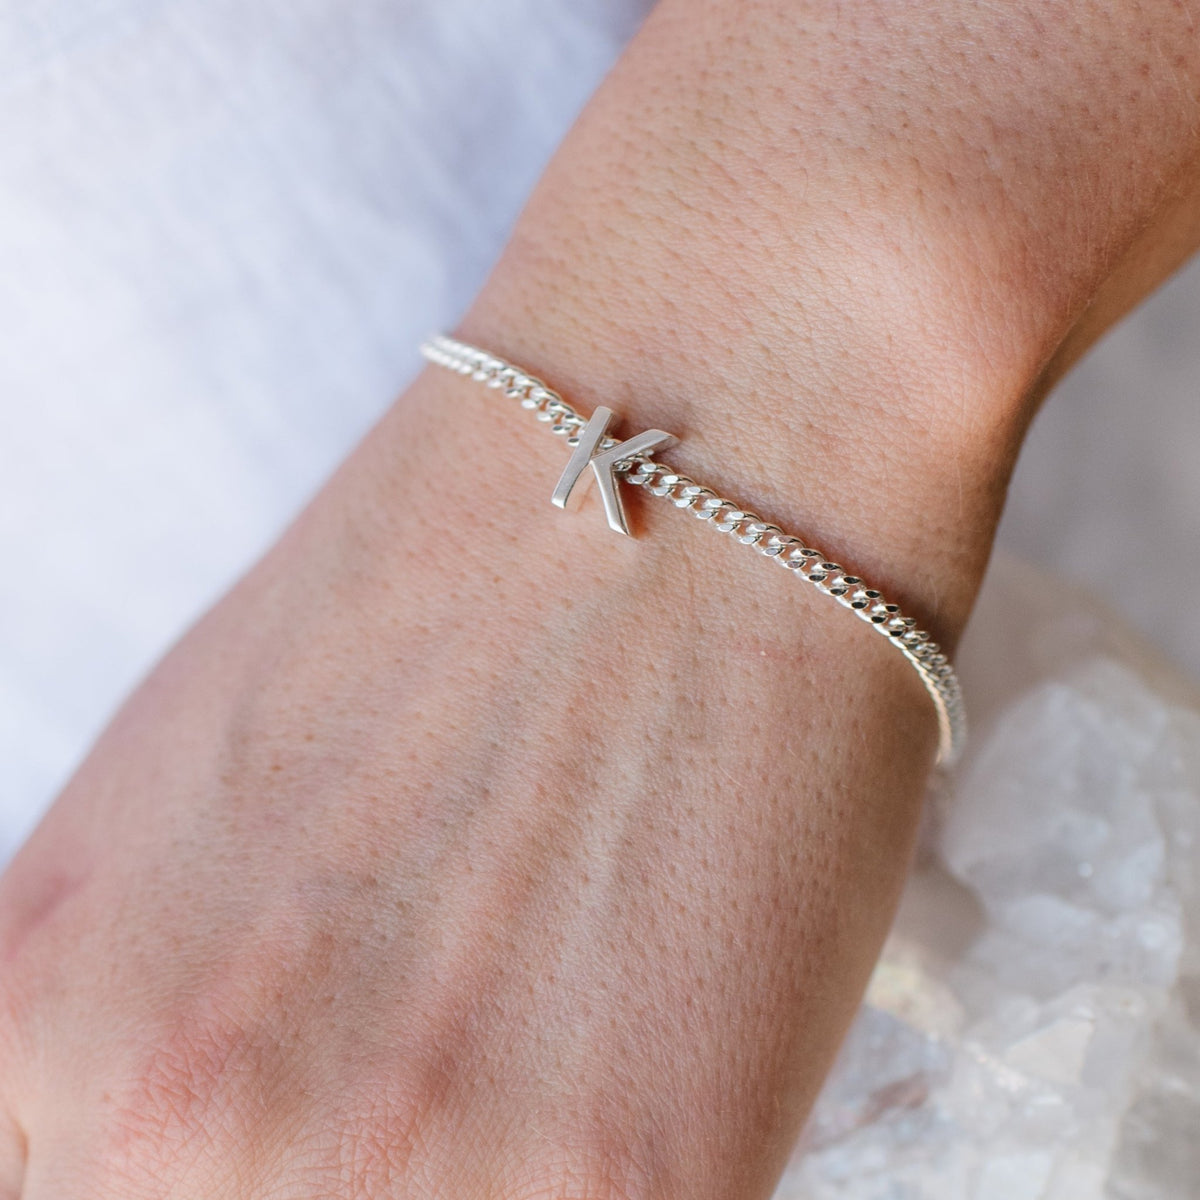 CHARMED LINK BRACELET - GOLD OR SILVER - SO PRETTY CARA COTTER